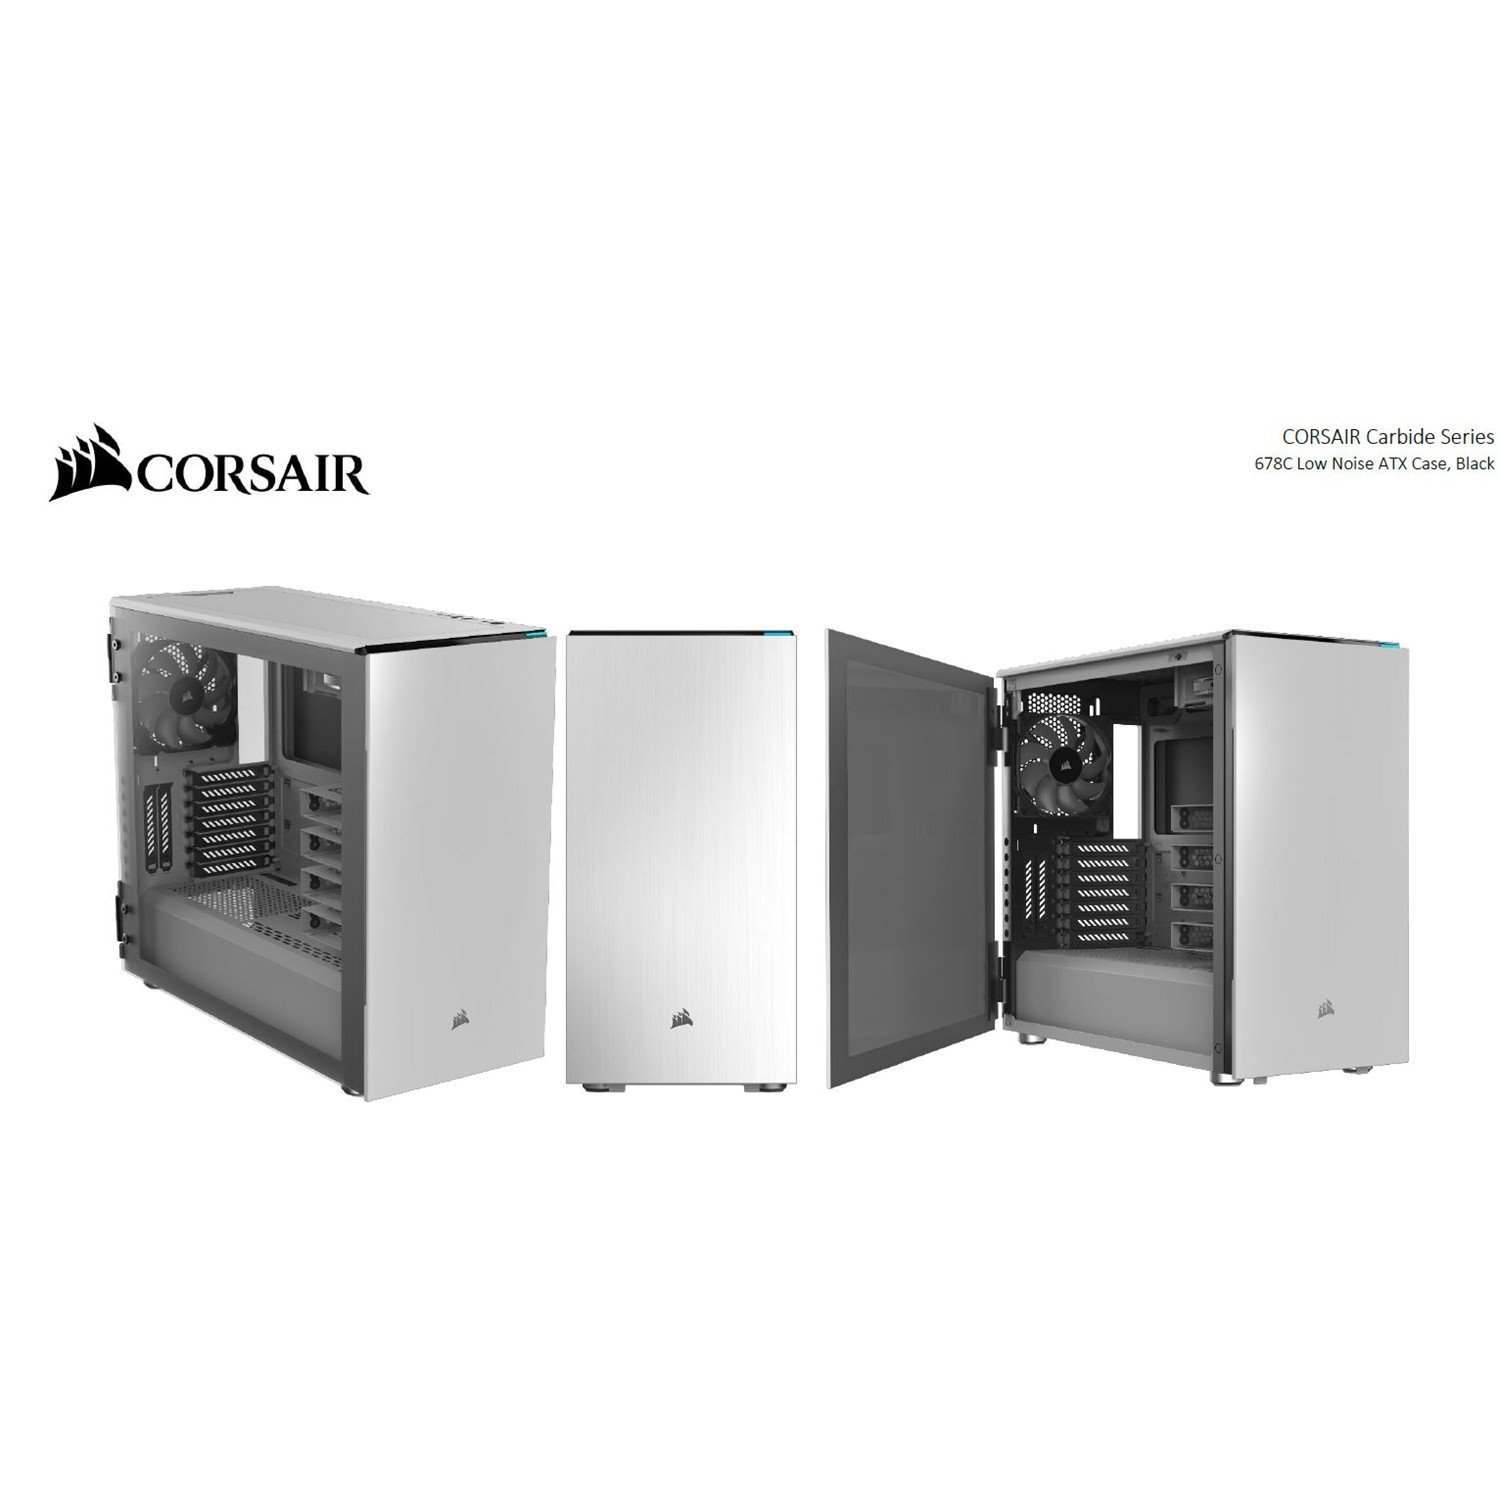 Corsair Carbide 678C Computer Case - ATX Motherboard Supported - White